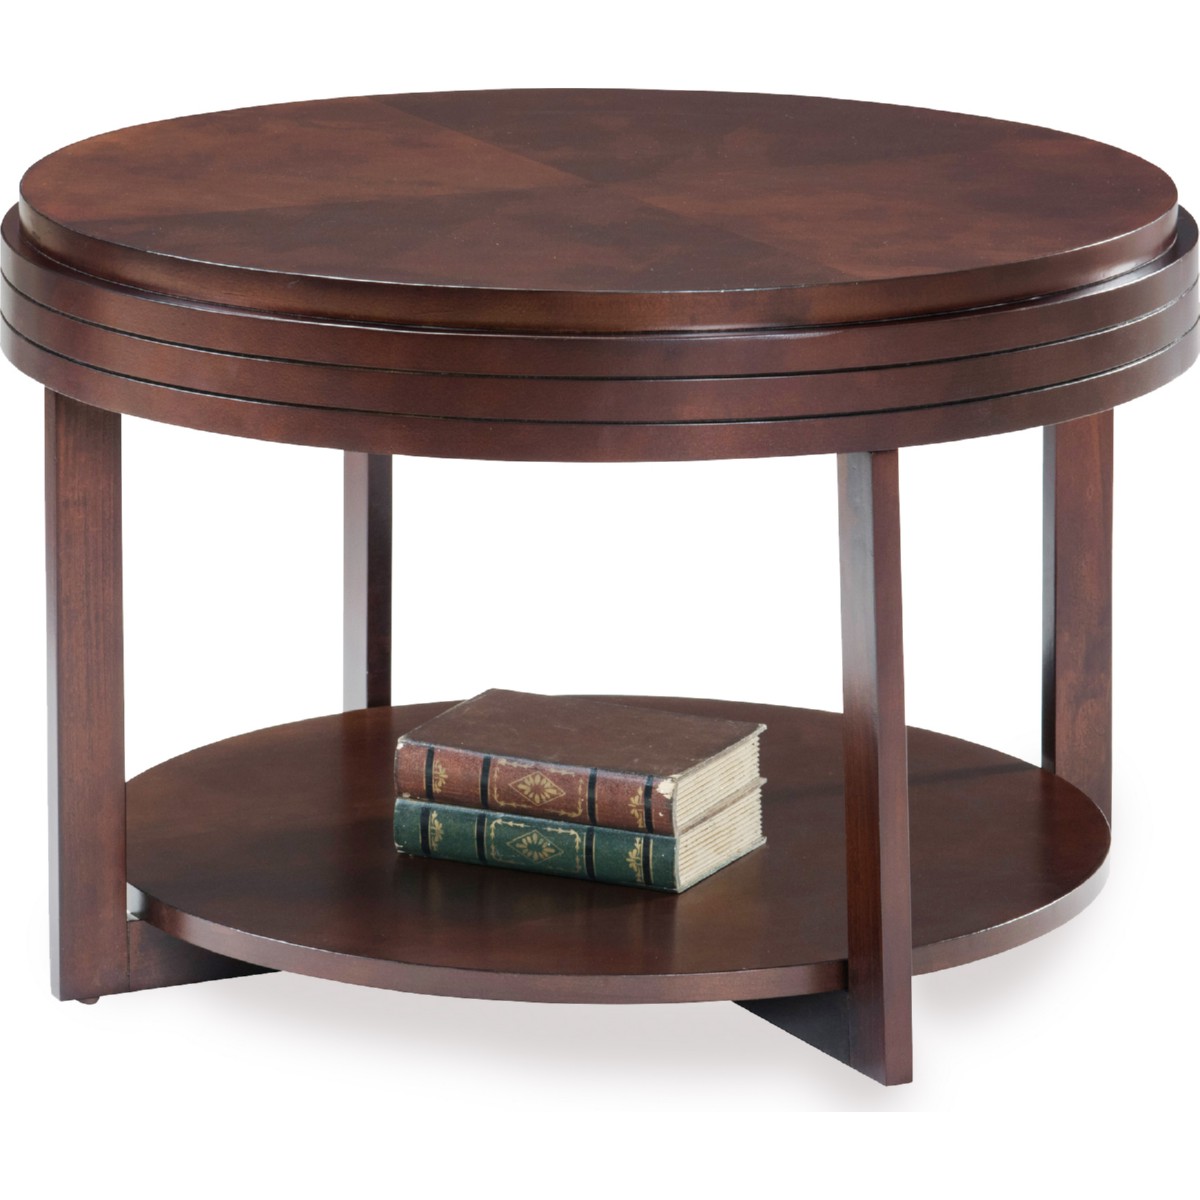 Leick 10108-CH Round Small Coffee Table in Chocolate Cherry Finish w